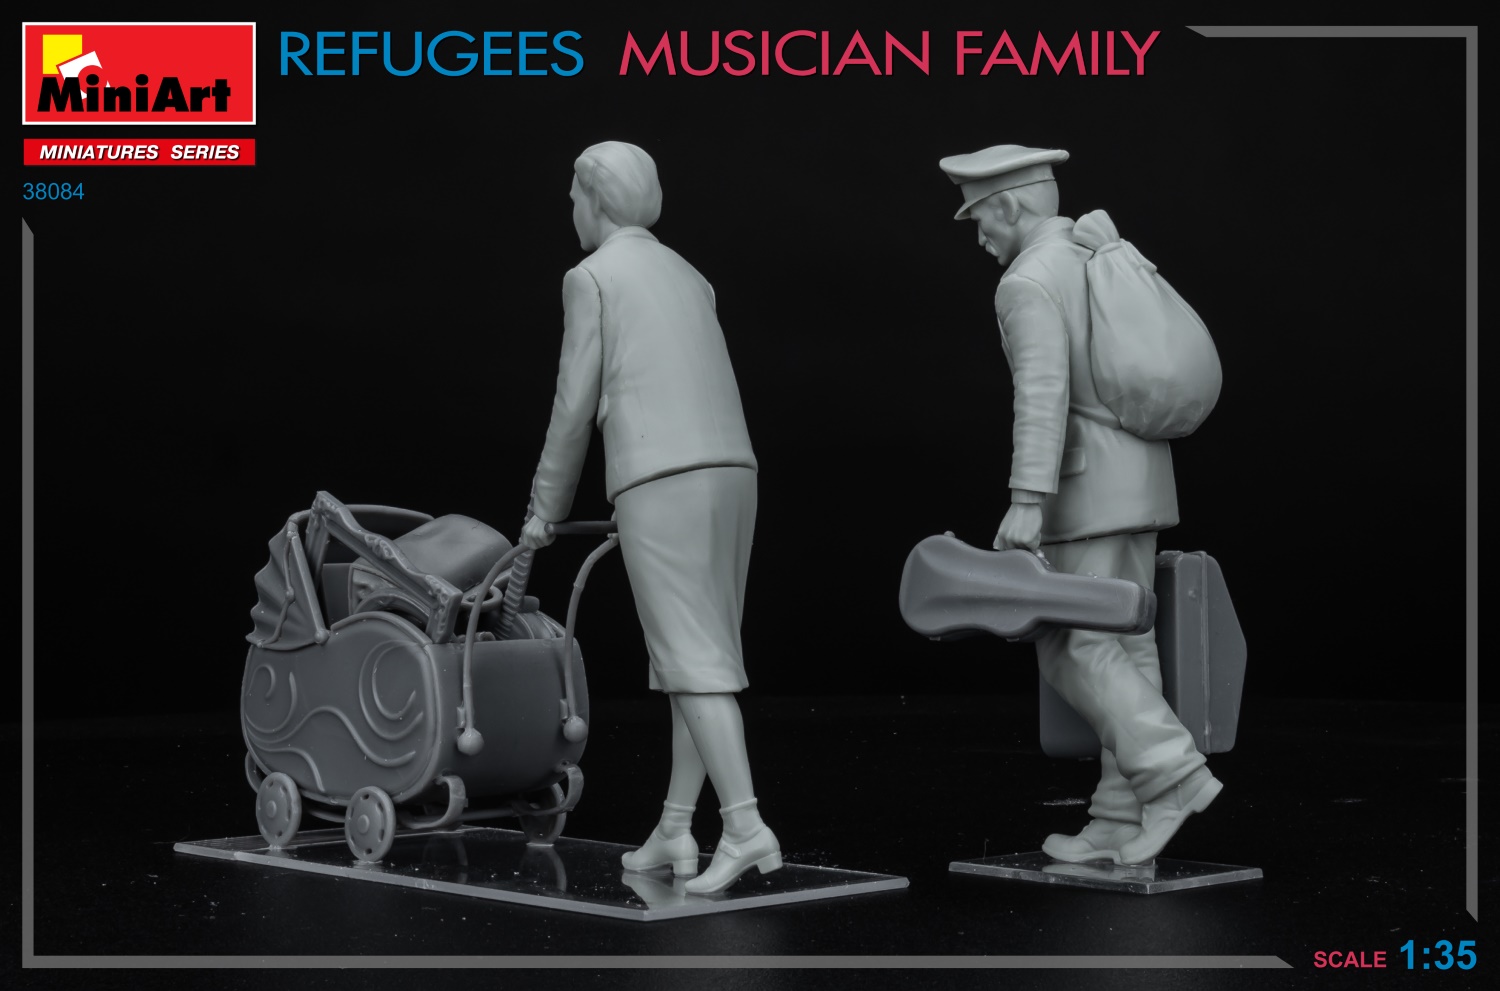 38084 REFUGEES. MUSICIAN FAMILY – Miniart